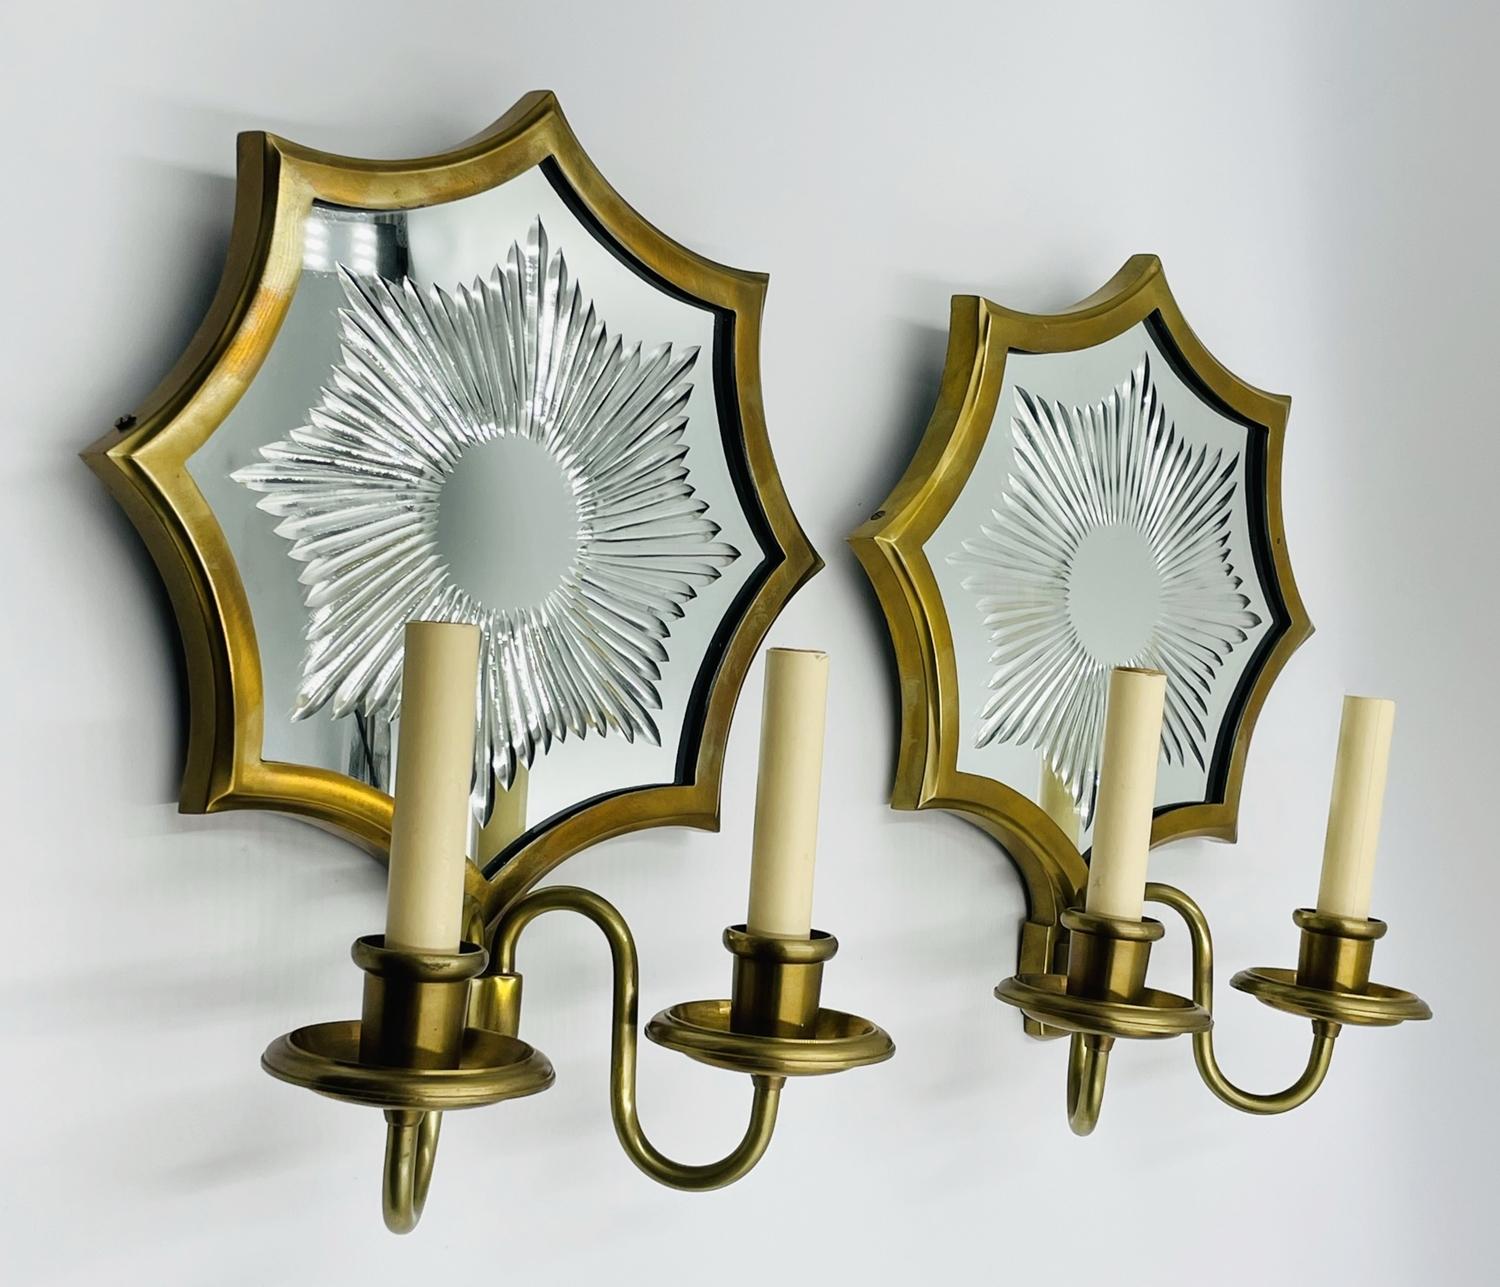 Pair of Solid Brass & Mirror Wall Sconces, E. F. Caldwell Attb 1